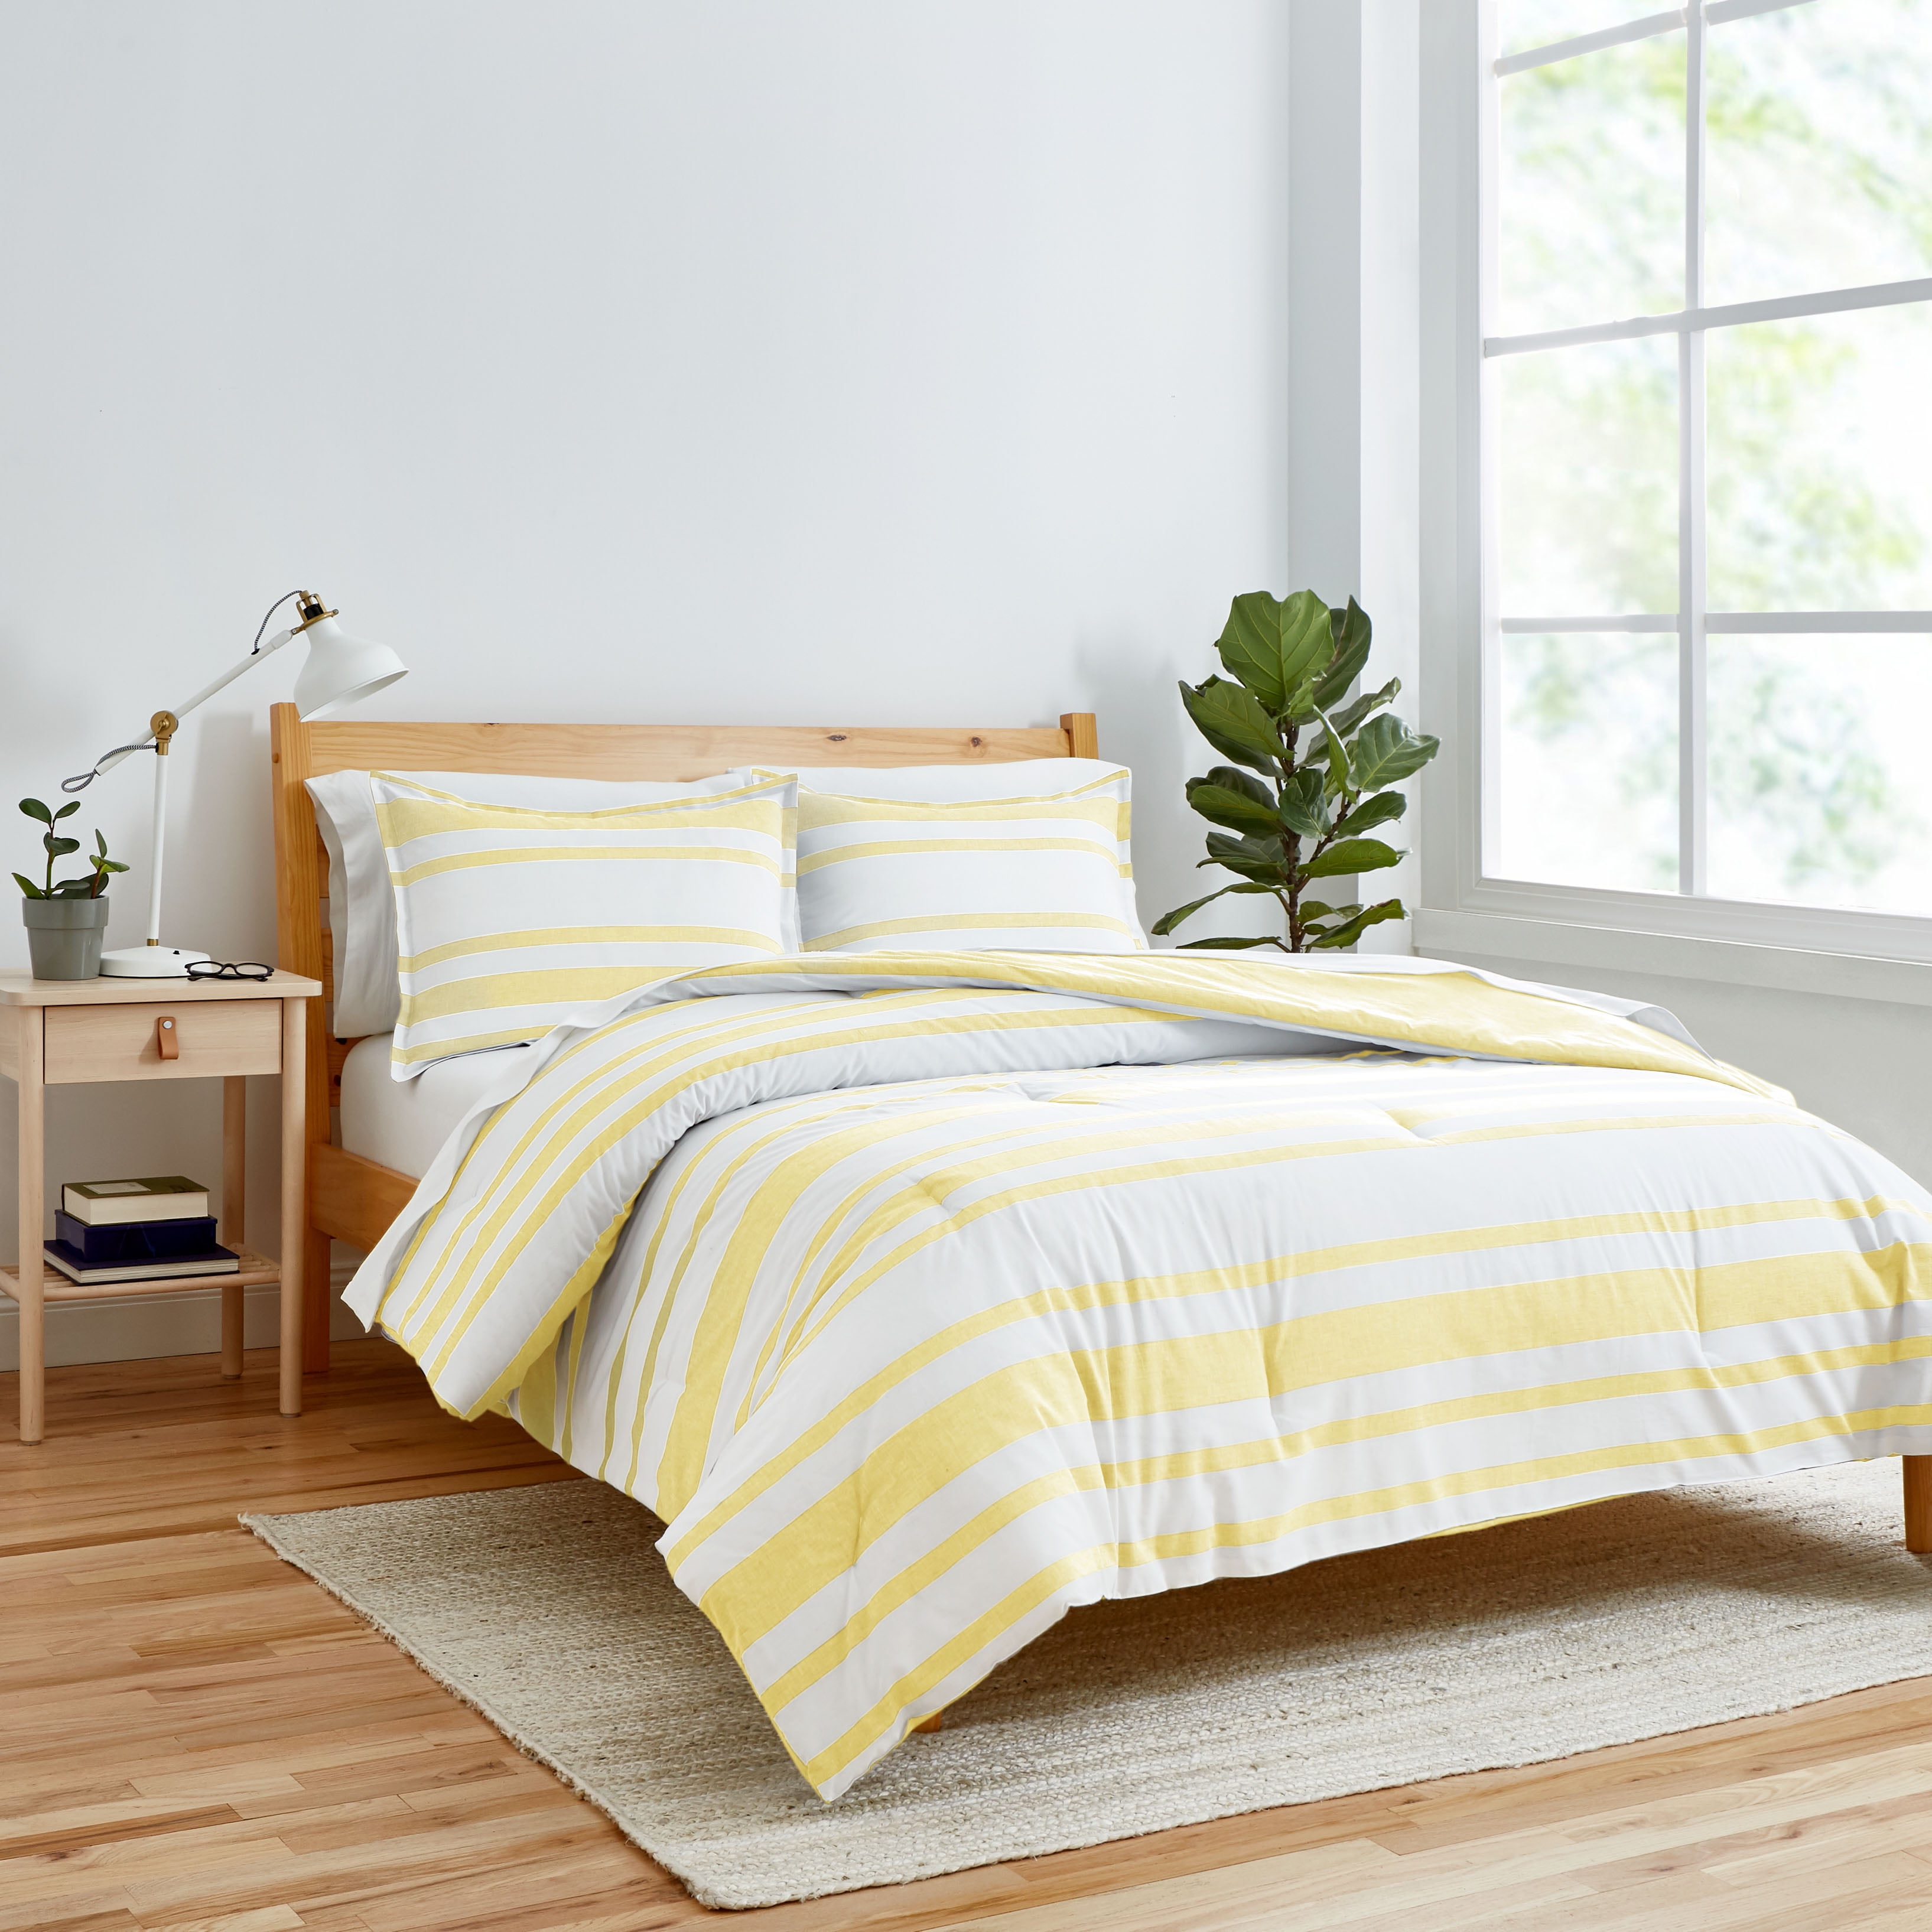 Gap Home Yarn Dyed Mixed Chambray Stripe Reversible Organic Cotton Comforter  Set, Full/Queen, Yellow, 3-Pieces 